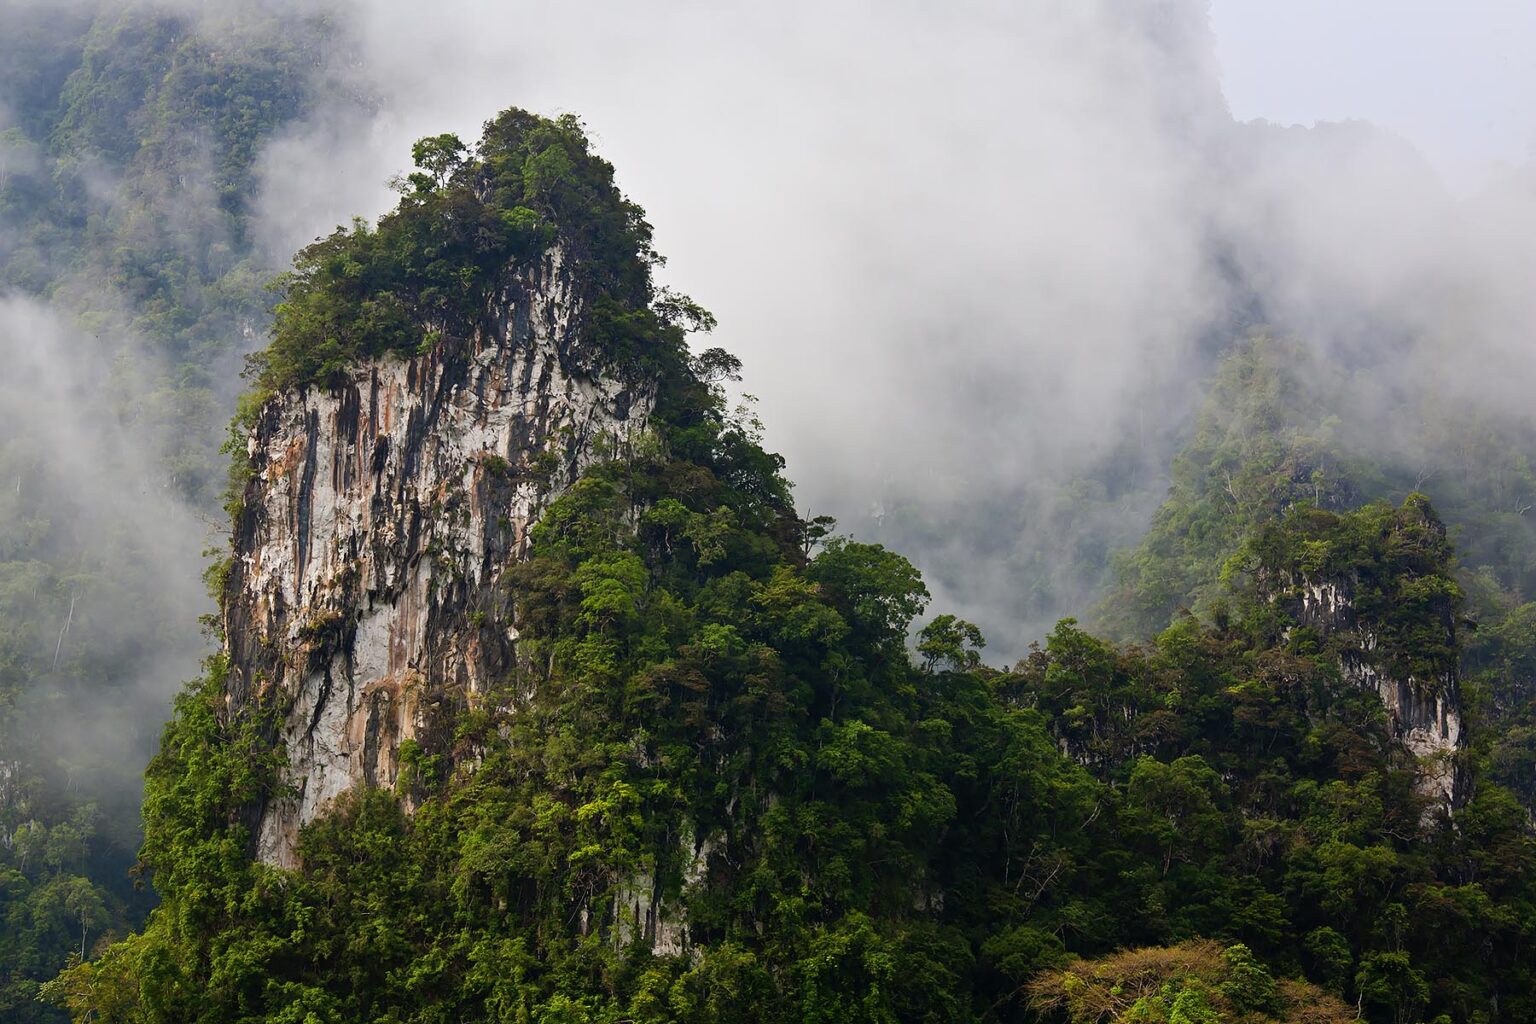 Rainforest mist lingers in the KARST FORMATION of KHAO SOK NATIONAL PARK - SURAI THANI PROVENCE, THAILAND